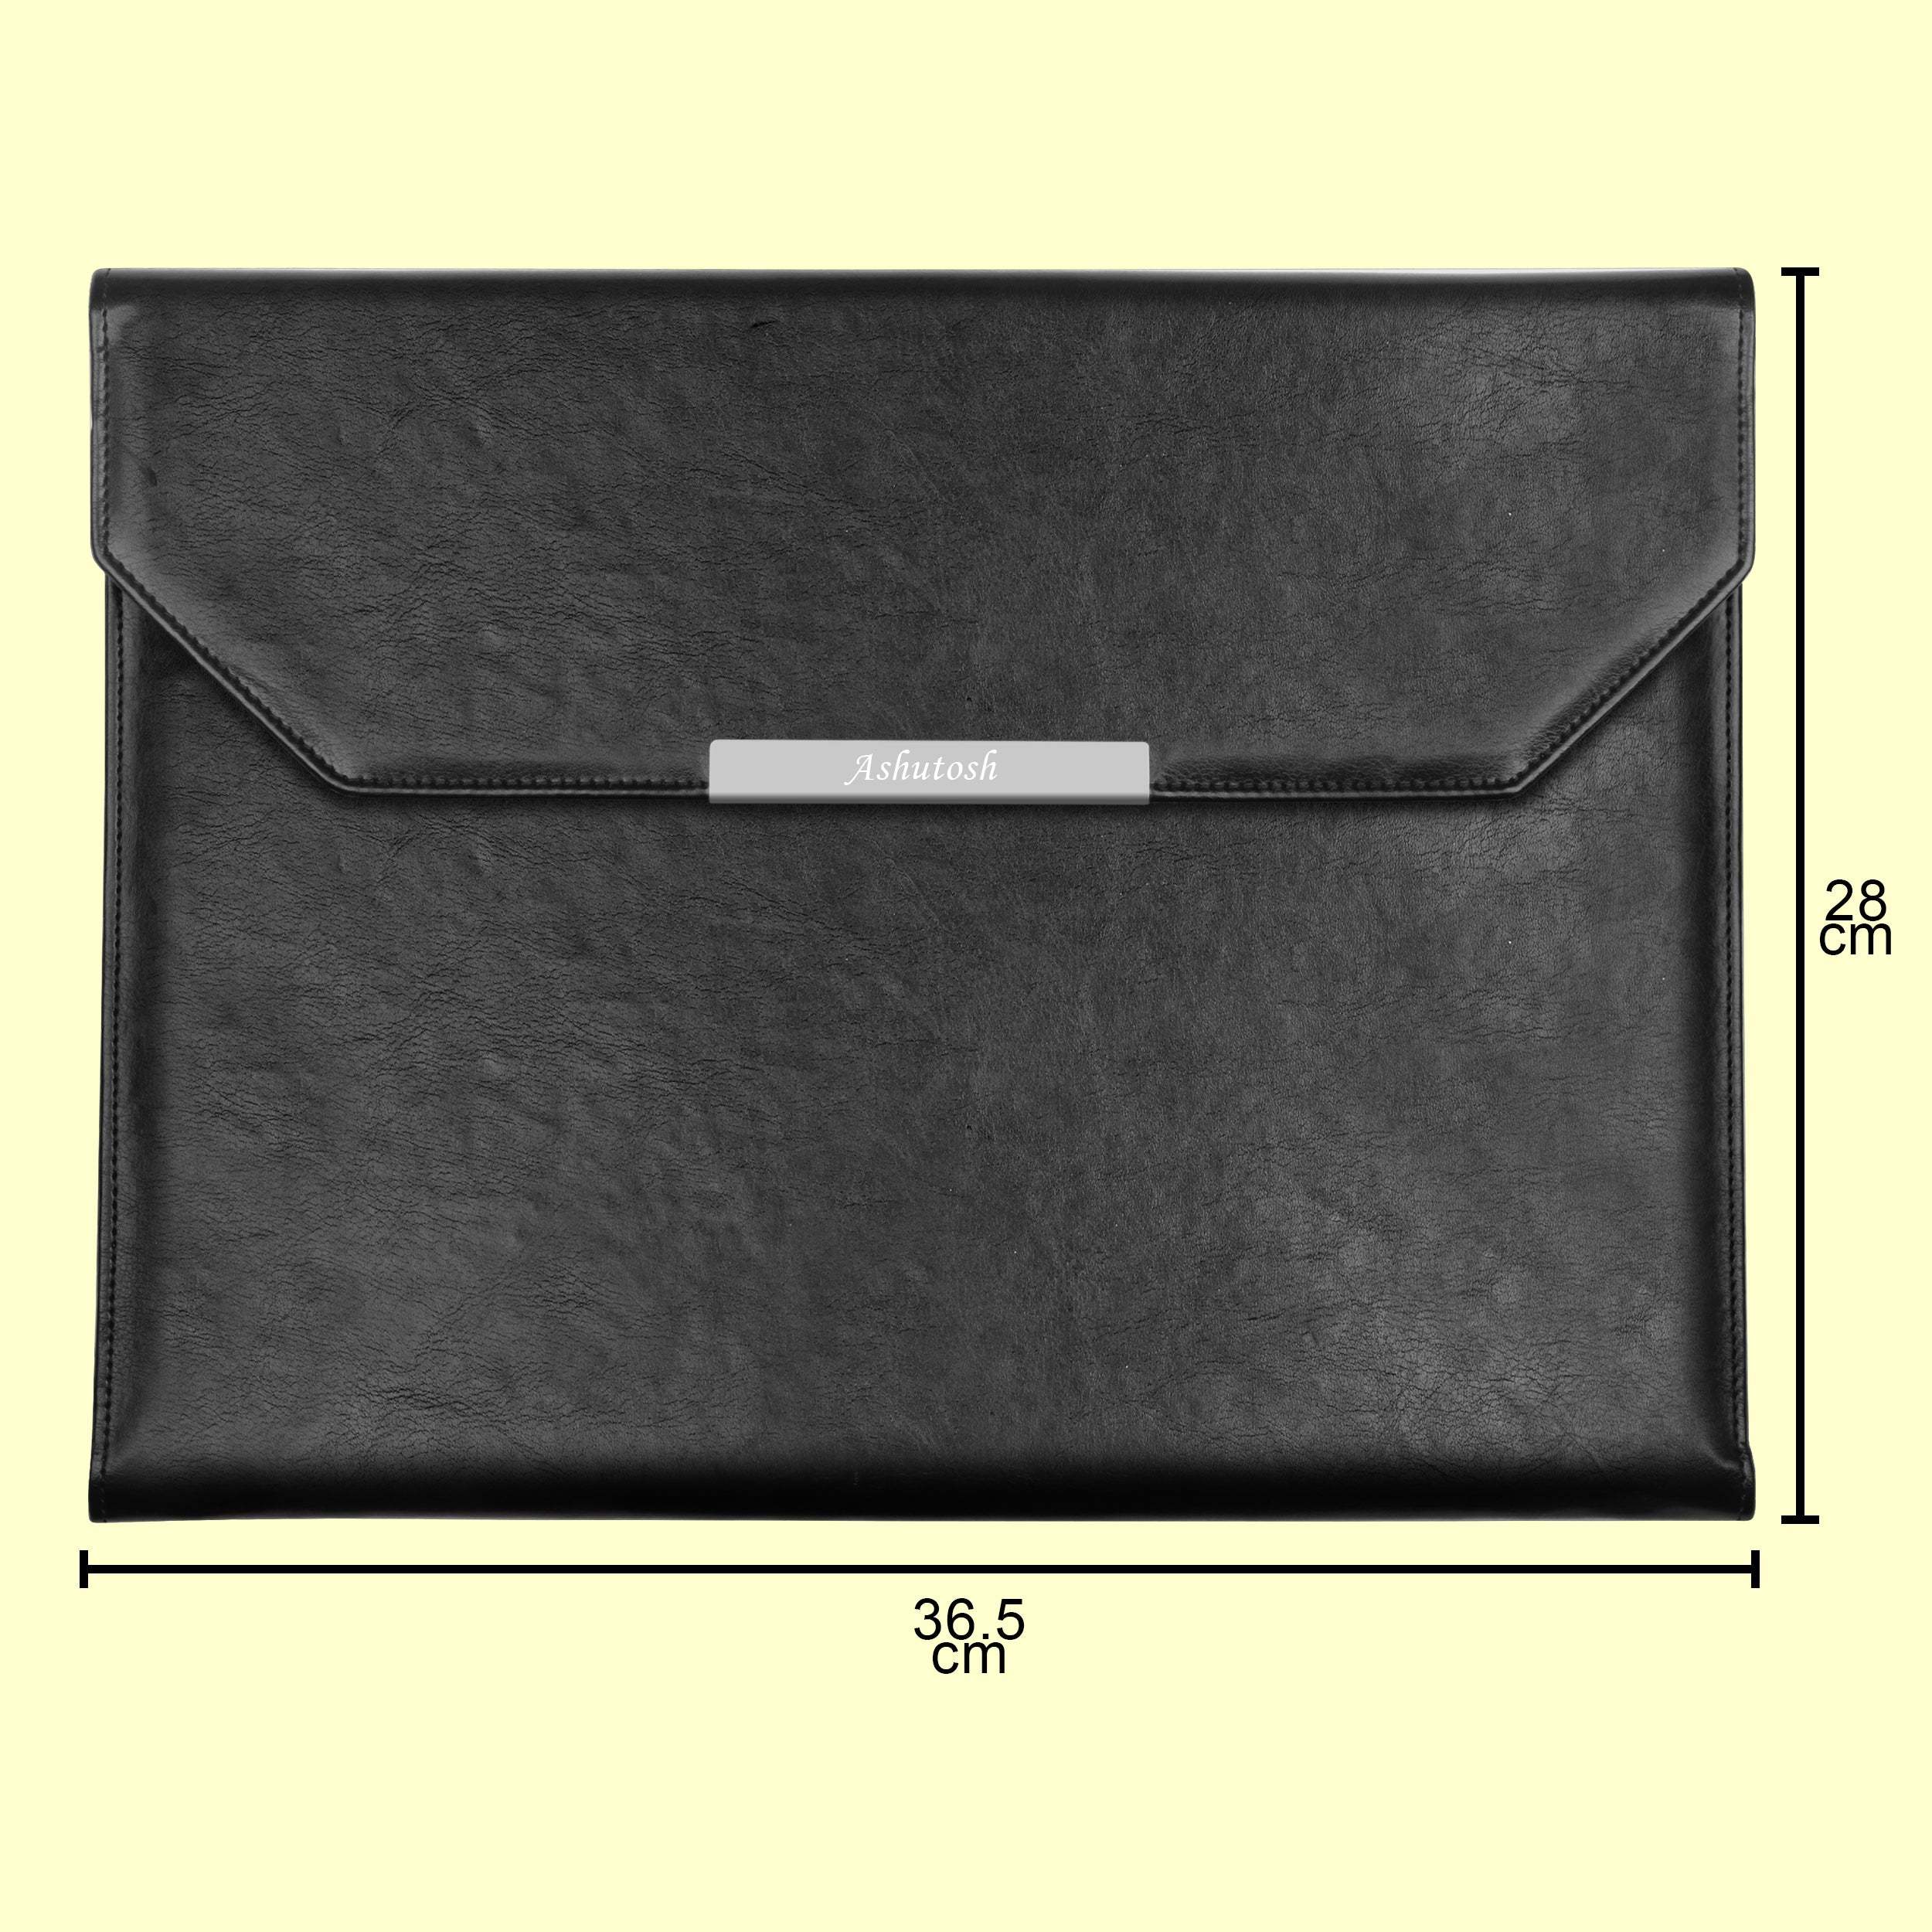 Personalized Premium Quality Leather Laptop Sleeve With Name